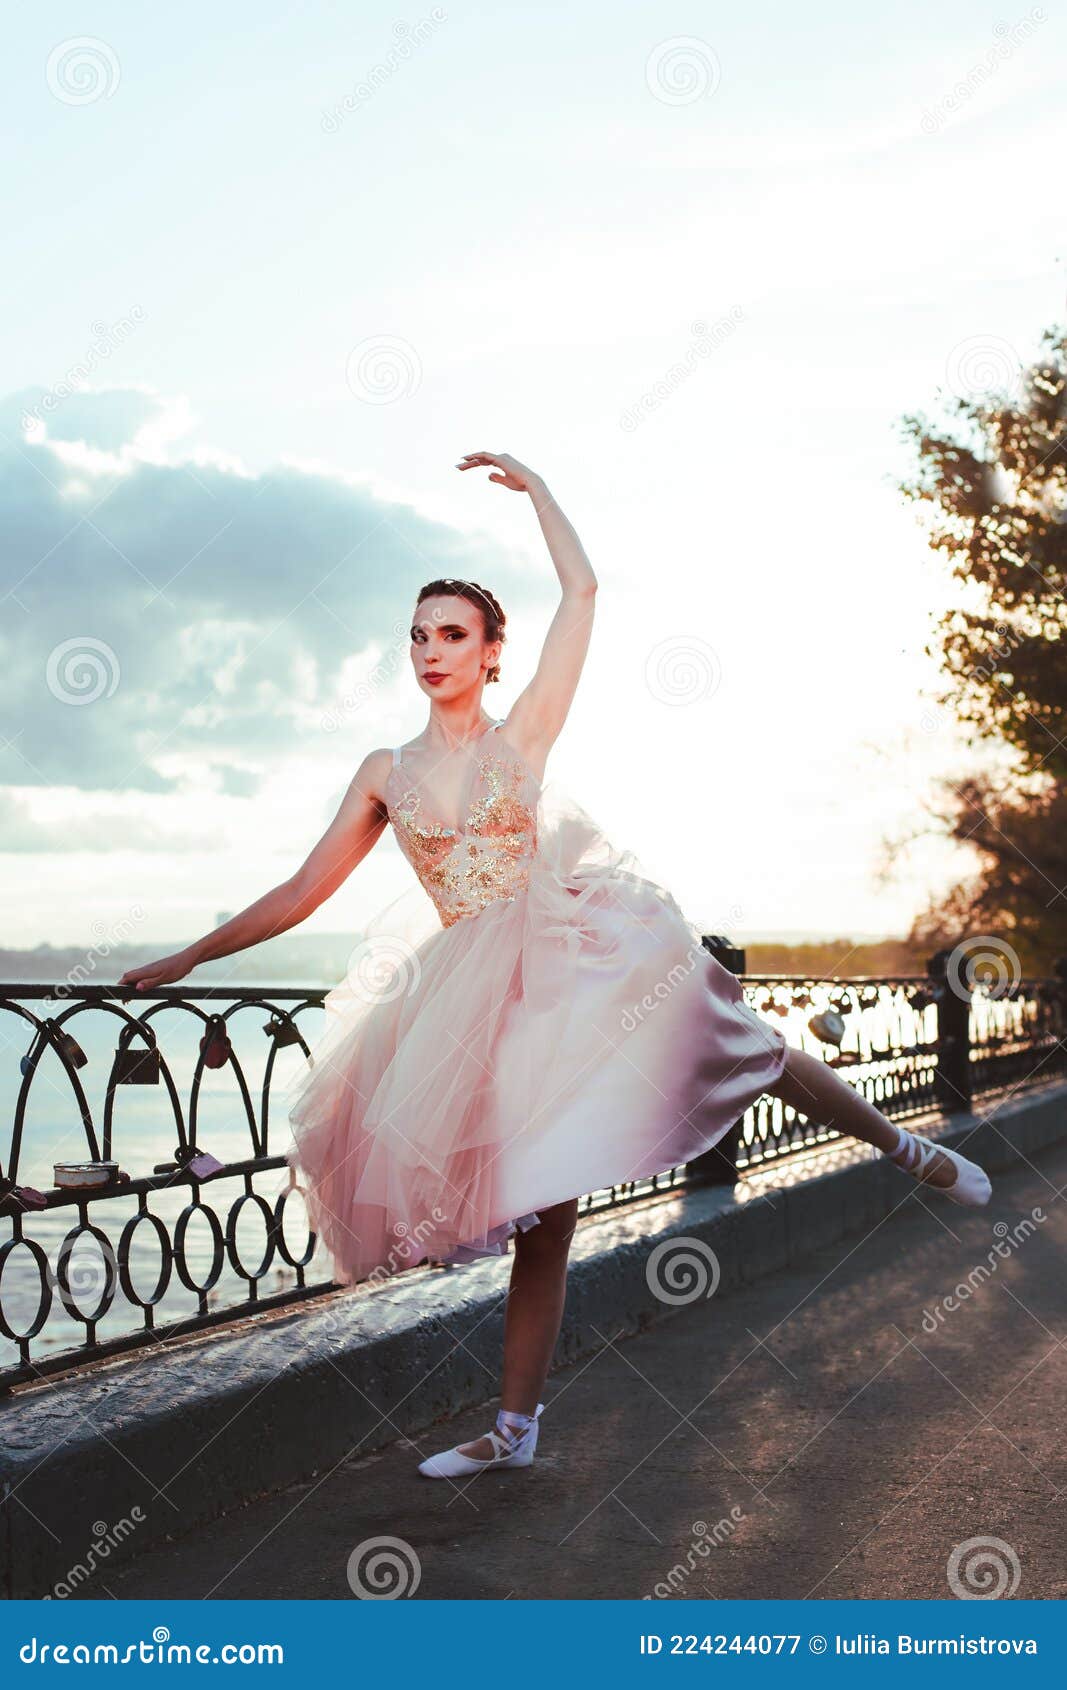 a thin ballerina in a pink silk corset dress gracefully raises her pointe-toed leg back on the river embankment in a